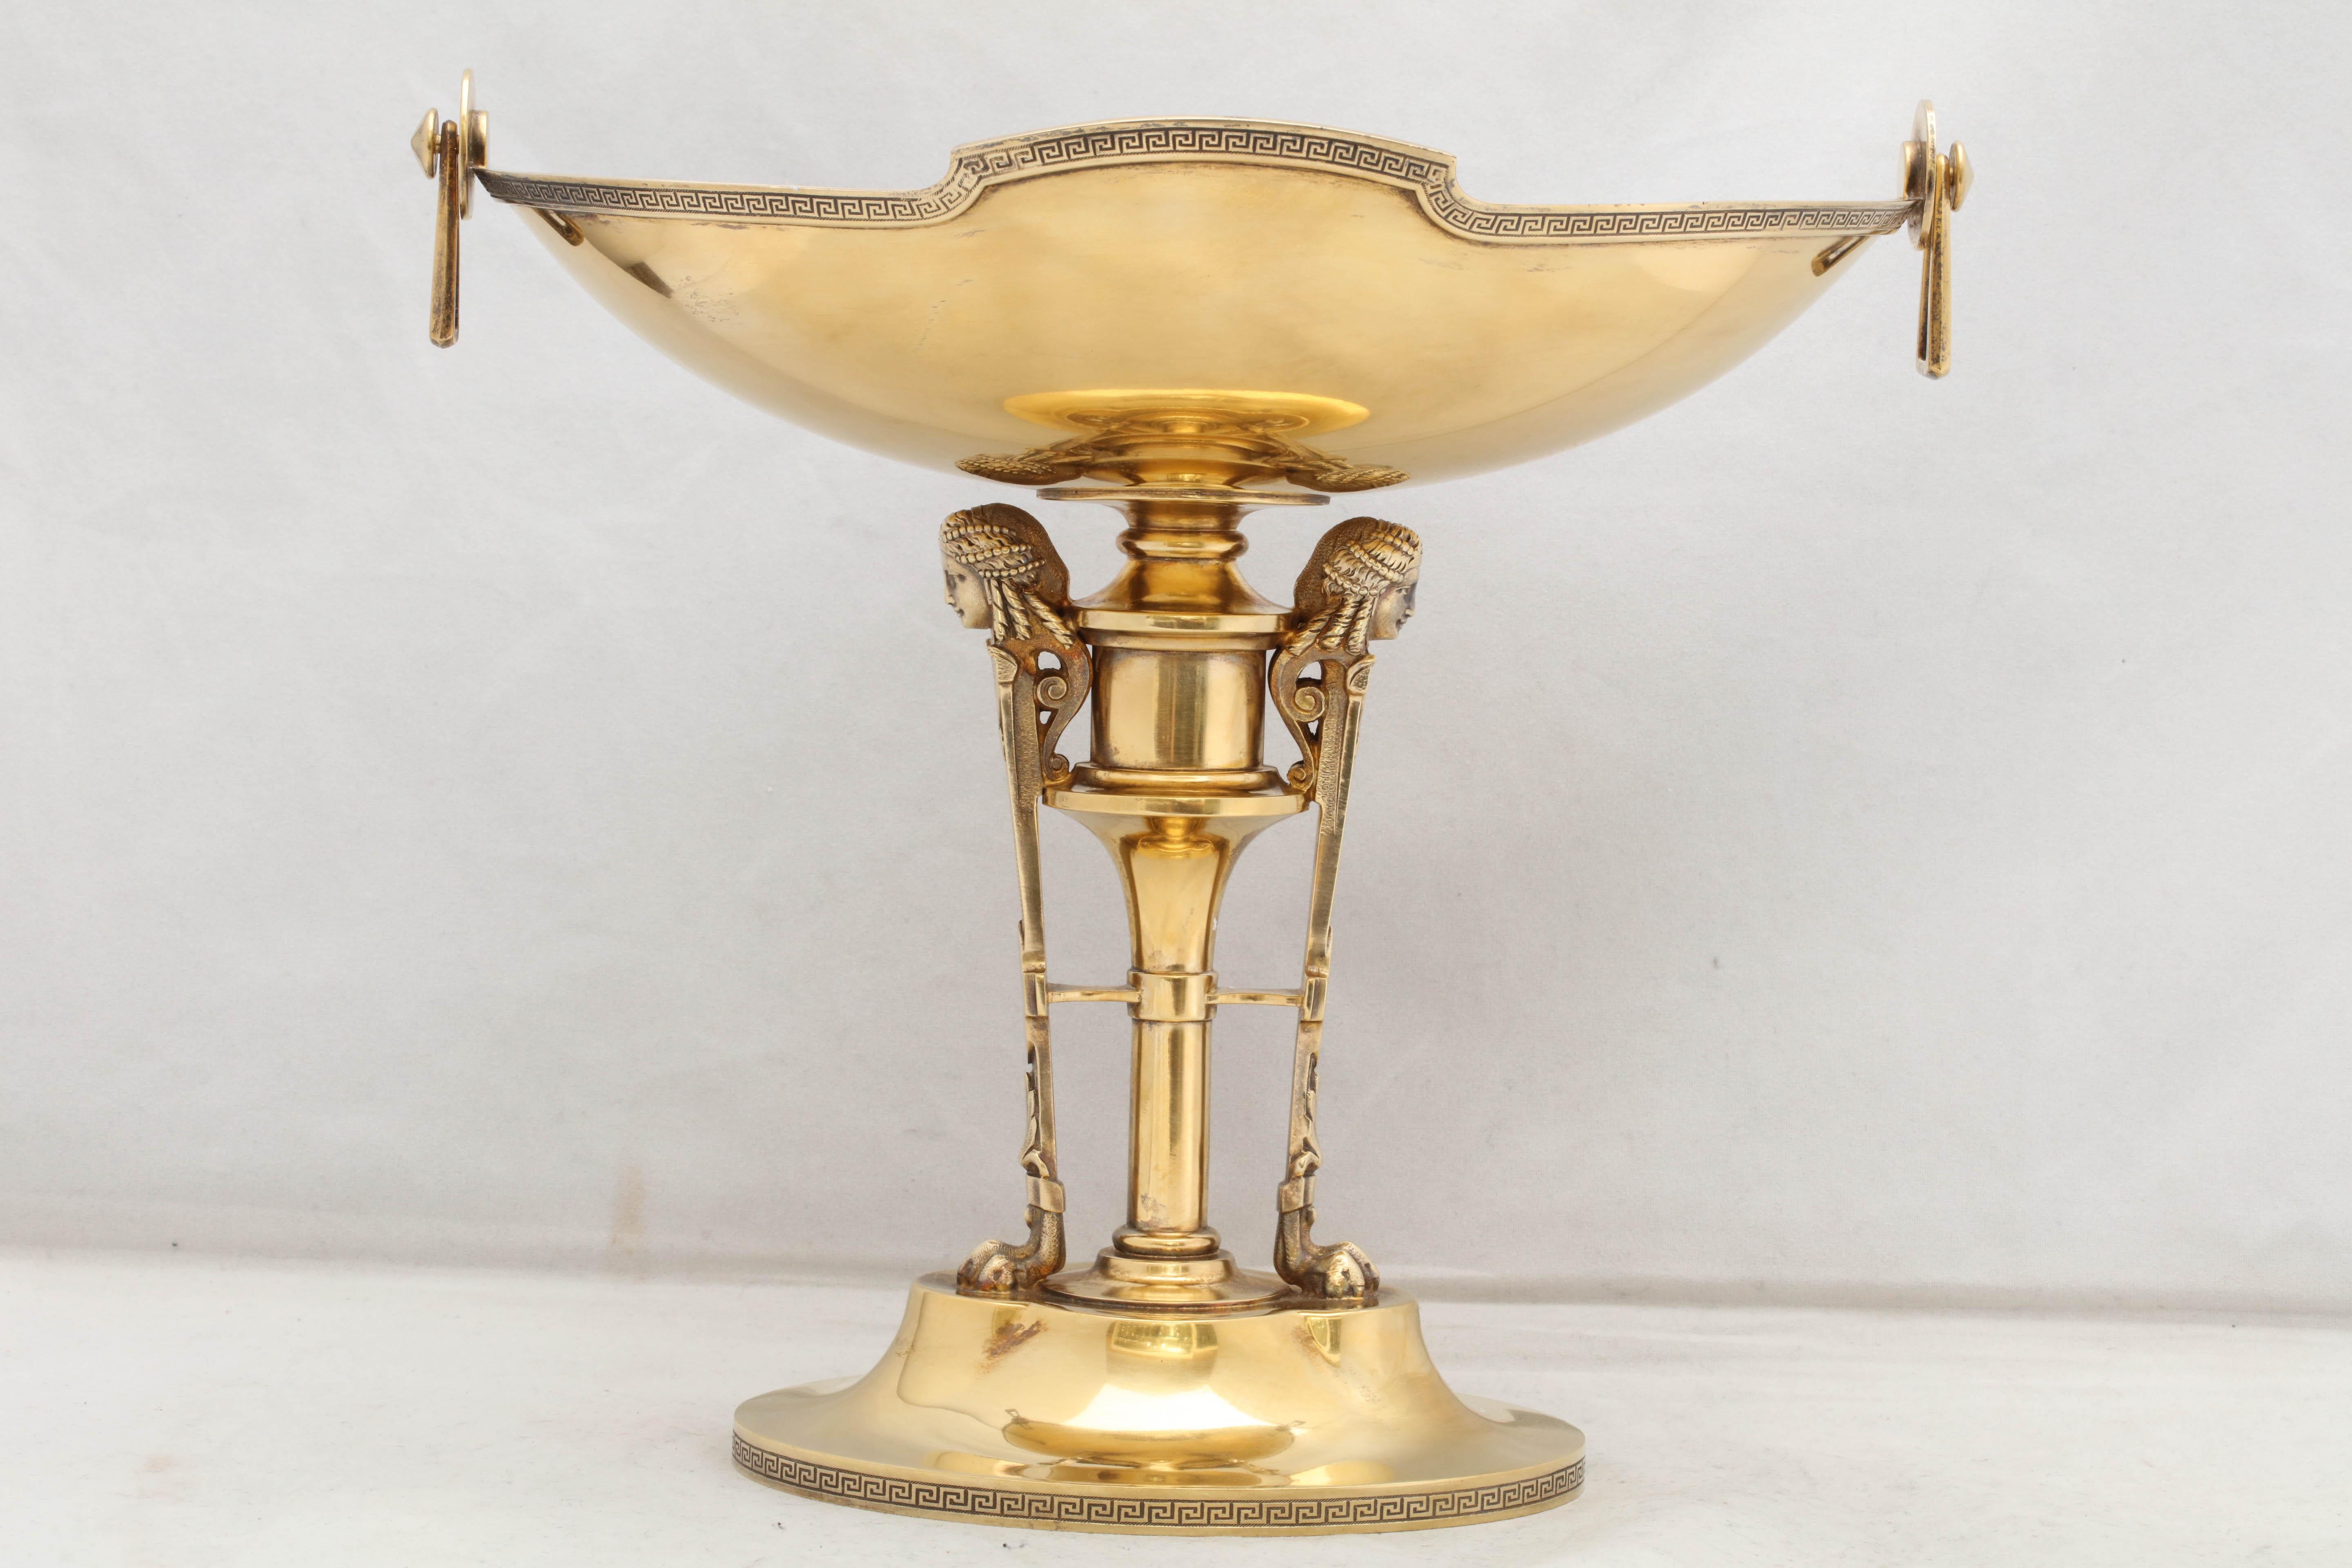 American Neoclassical Sterling Silver Gilt Centrepiece by Gorham For Sale